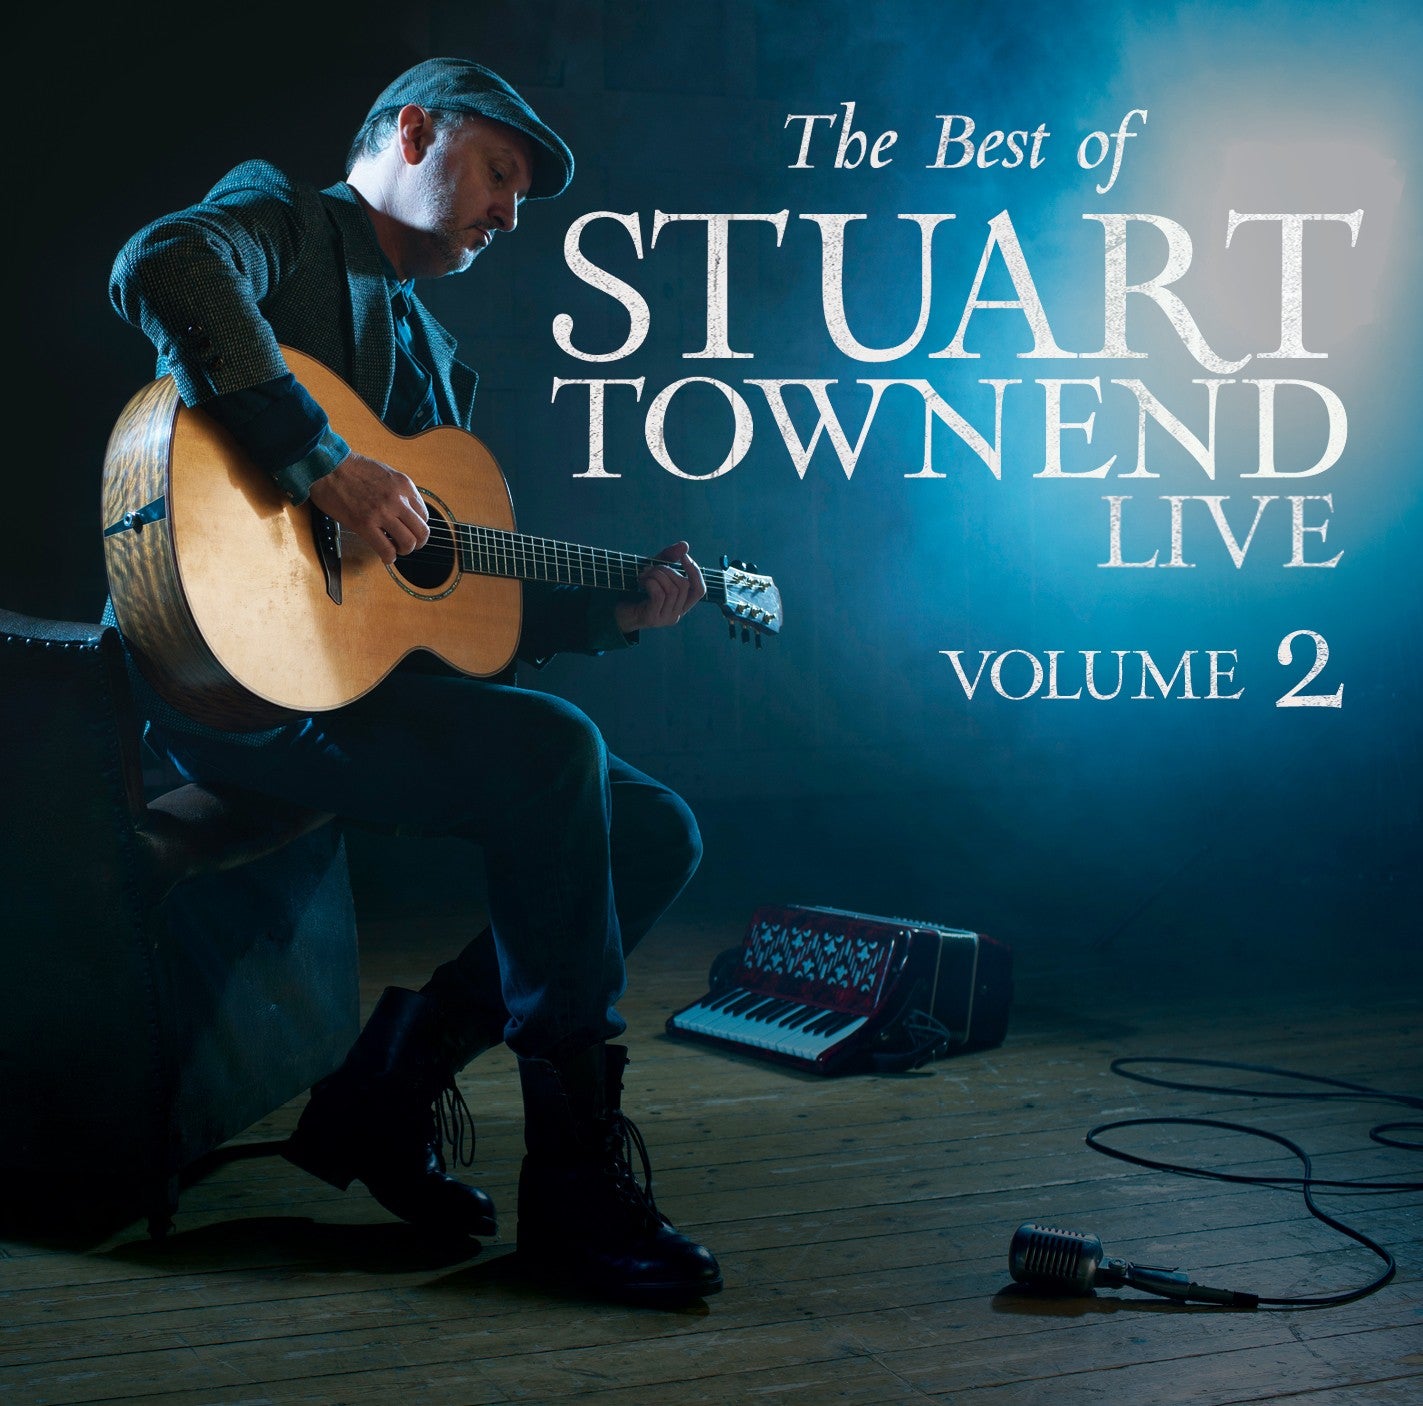 Image of The Best of Stuart Townend Live Vol. 2 CD other